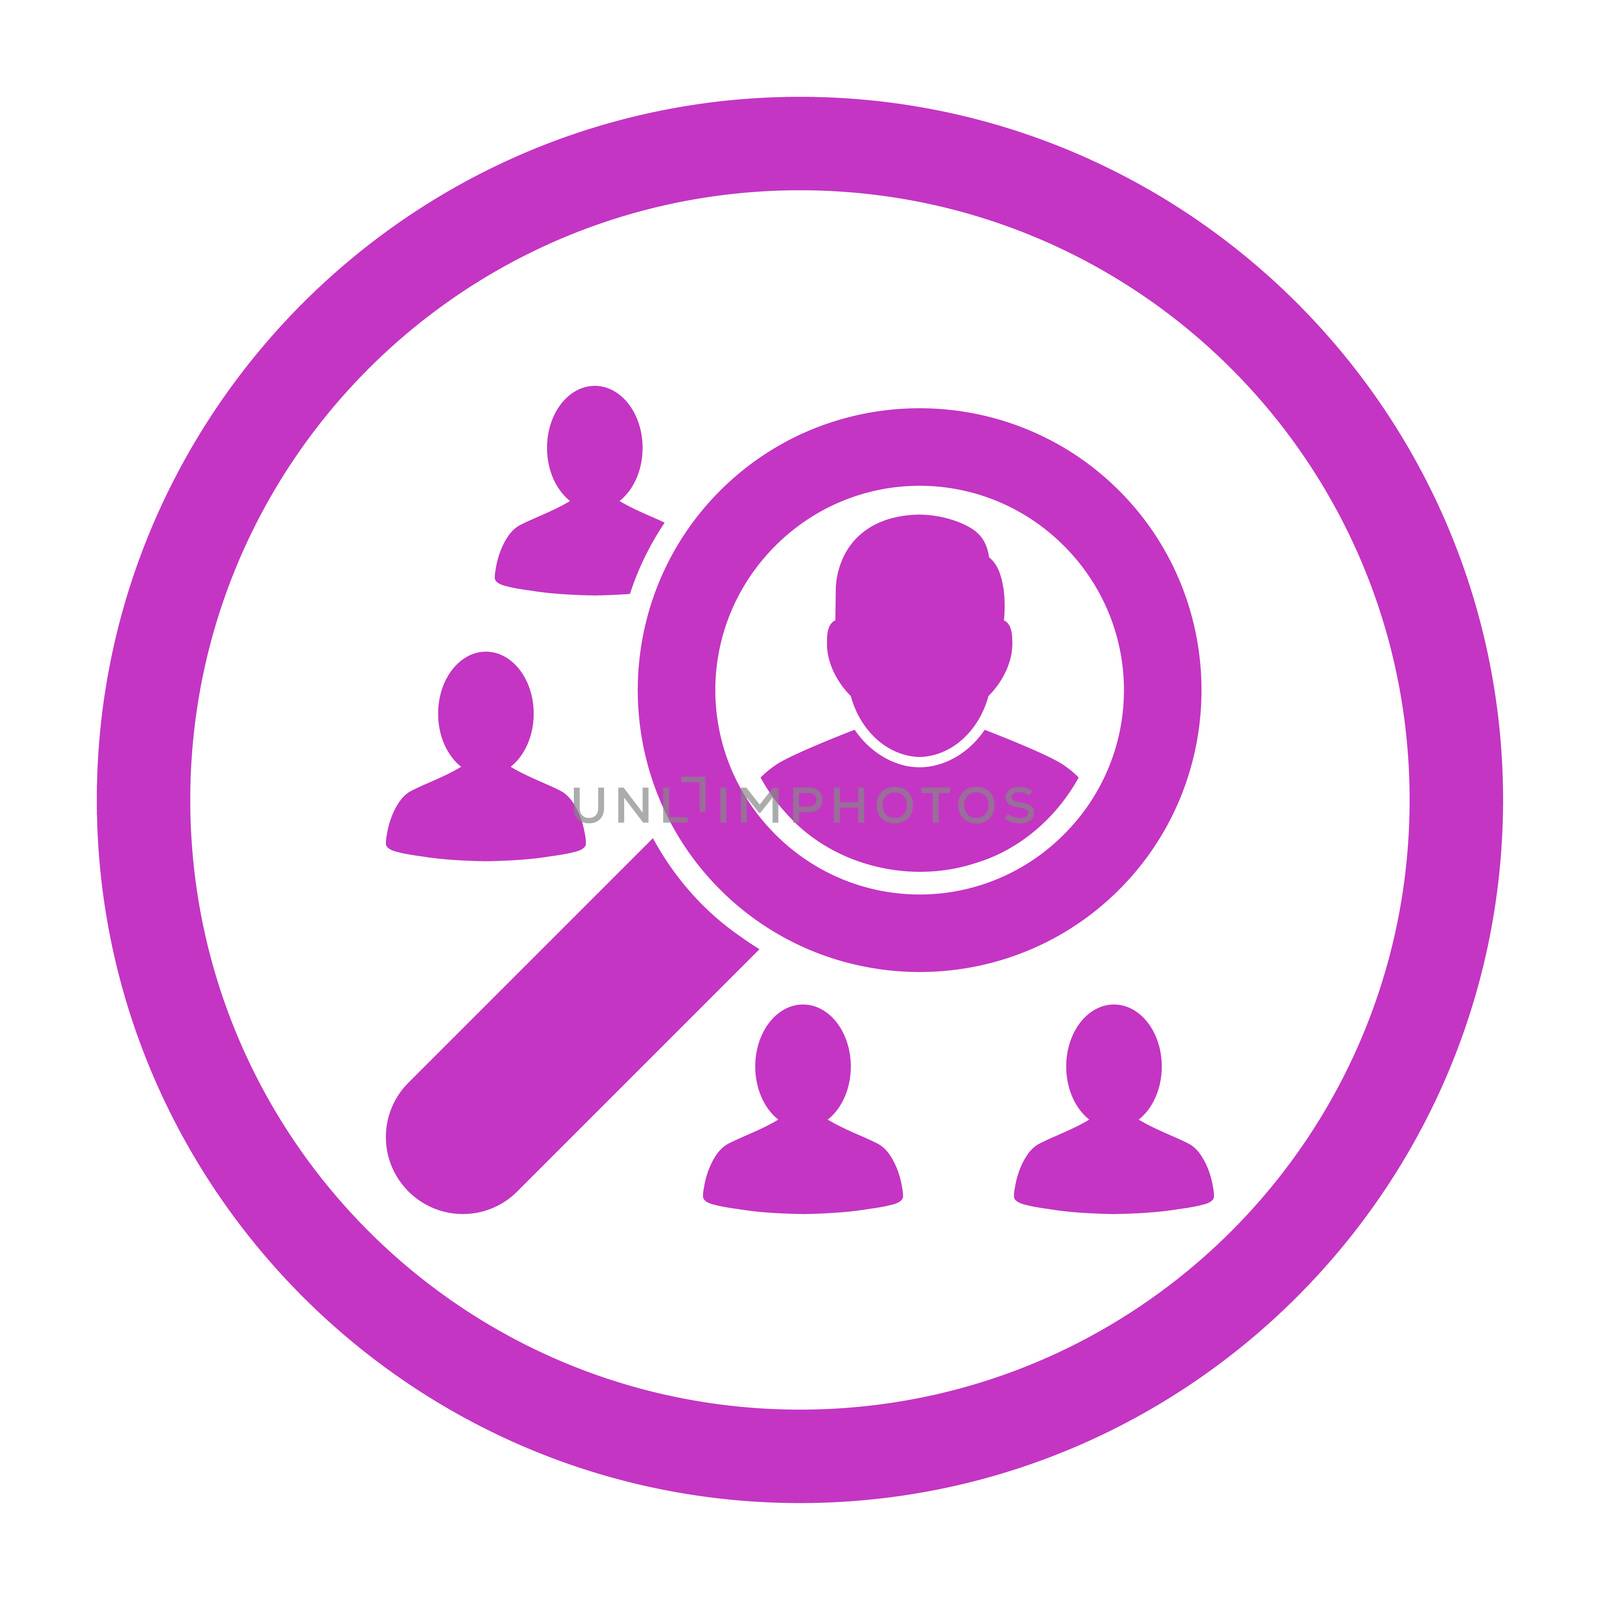 Marketing glyph icon. This rounded flat symbol is drawn with violet color on a white background.